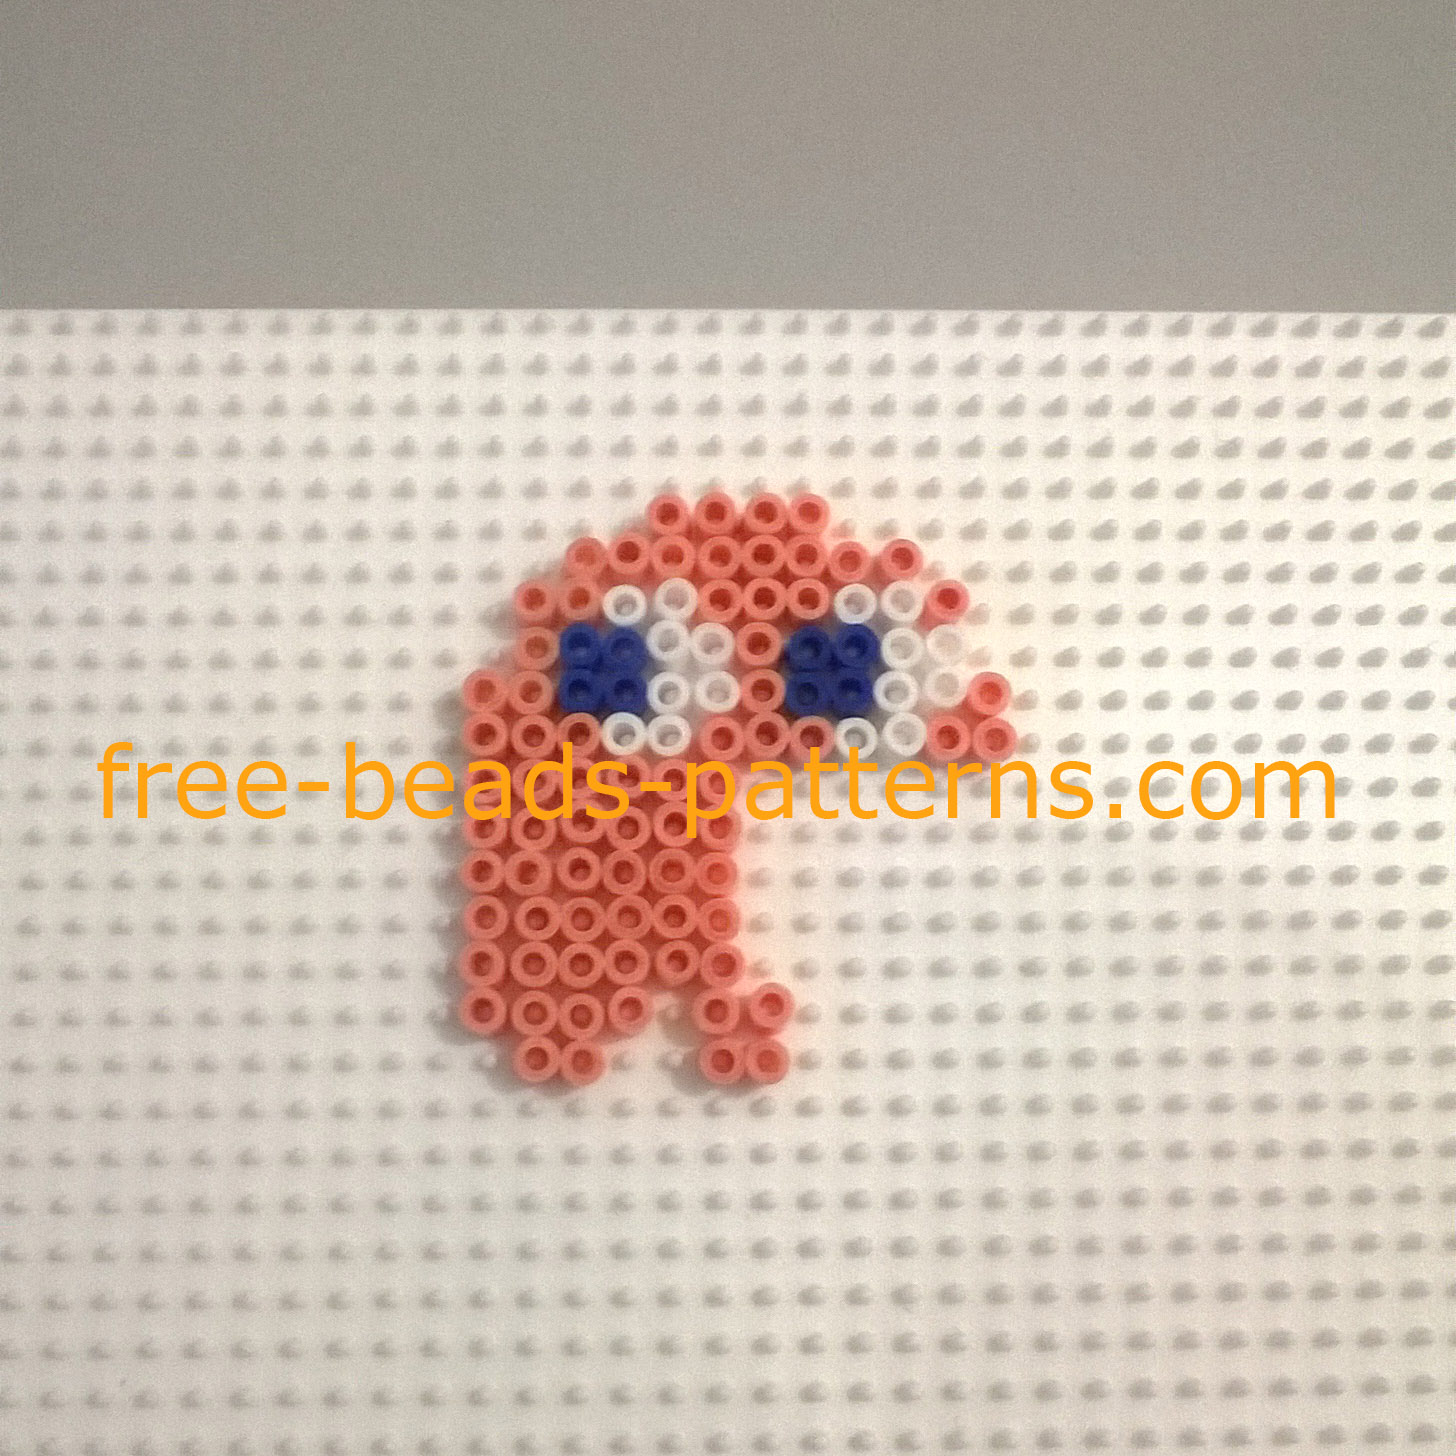 Pacman enemy Pinky work photo fuse beads author site user Bill (3)